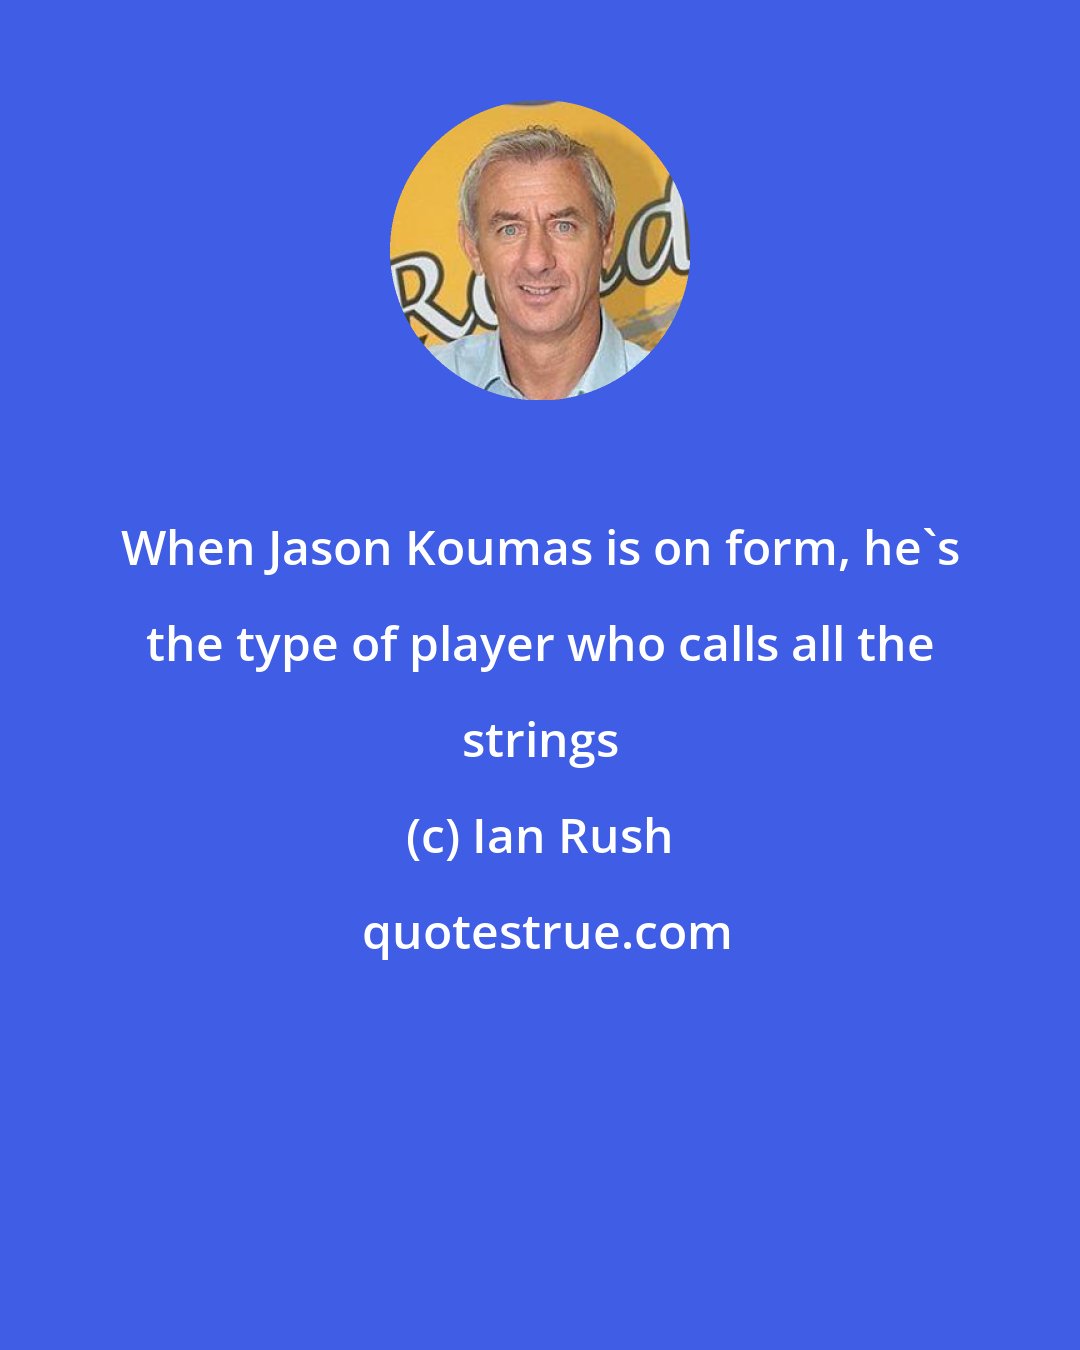 Ian Rush: When Jason Koumas is on form, he's the type of player who calls all the strings